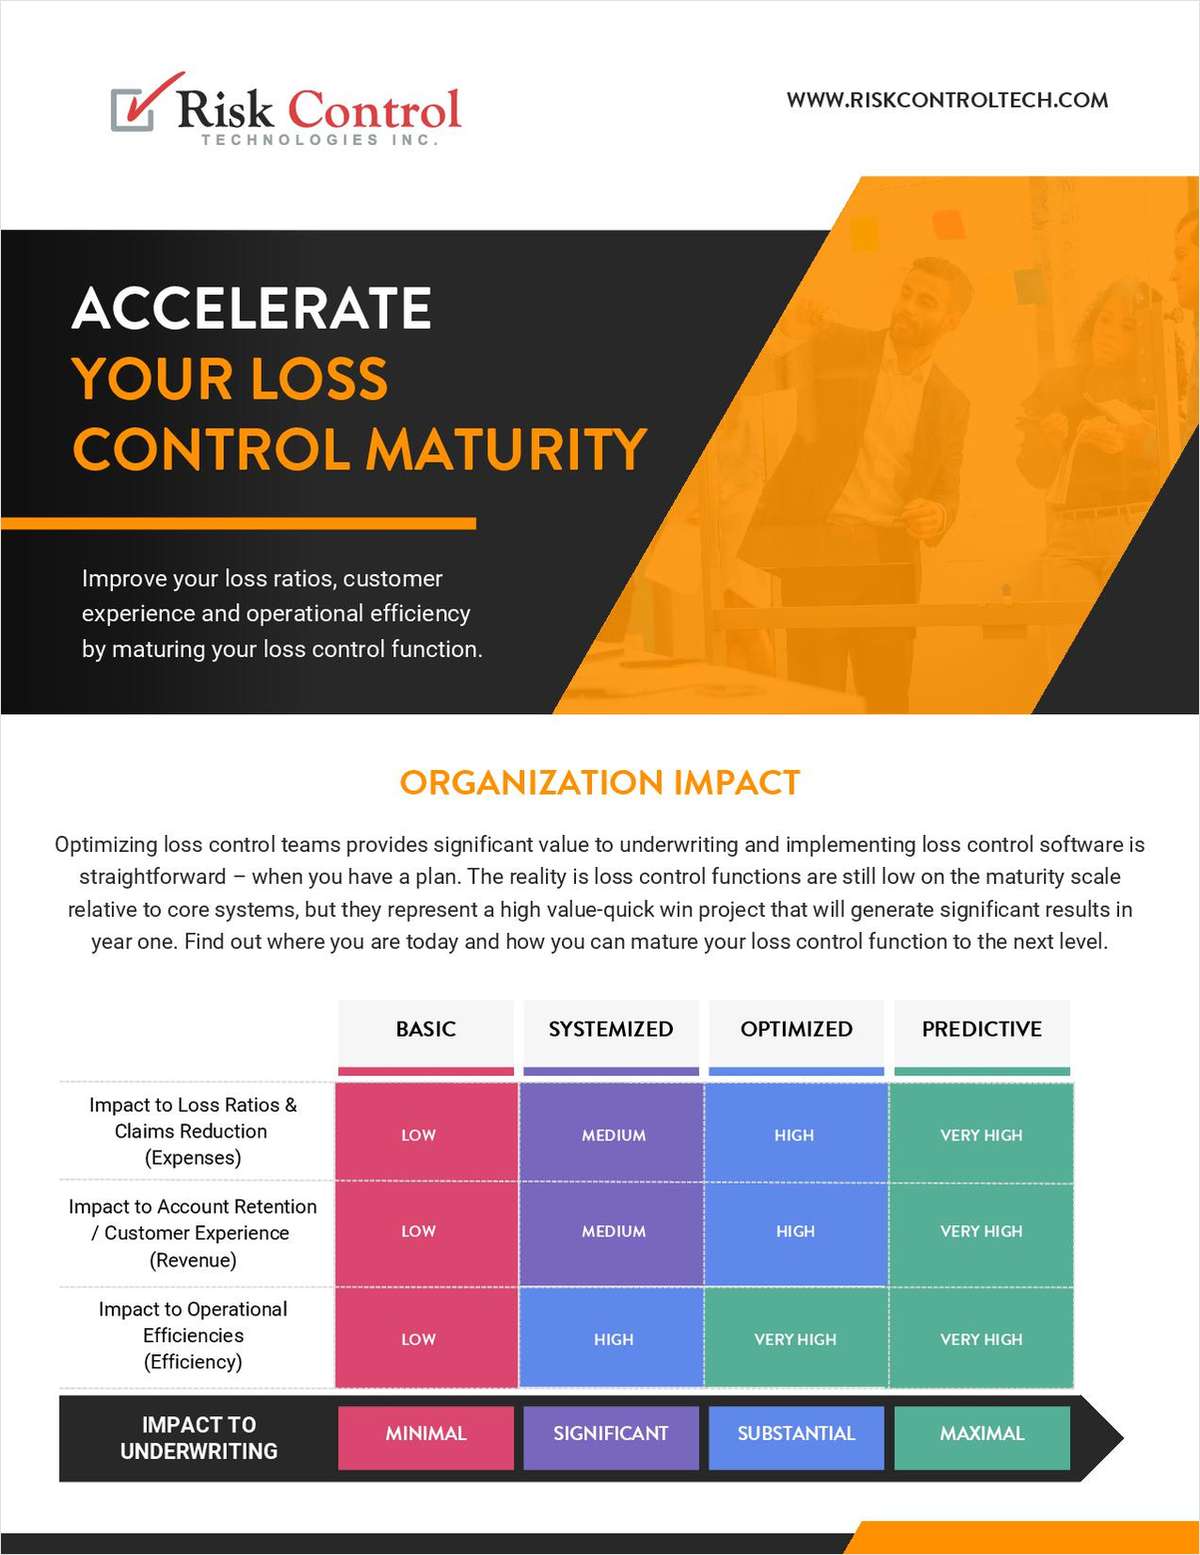 How to Accelerate Your Loss Control Maturity link